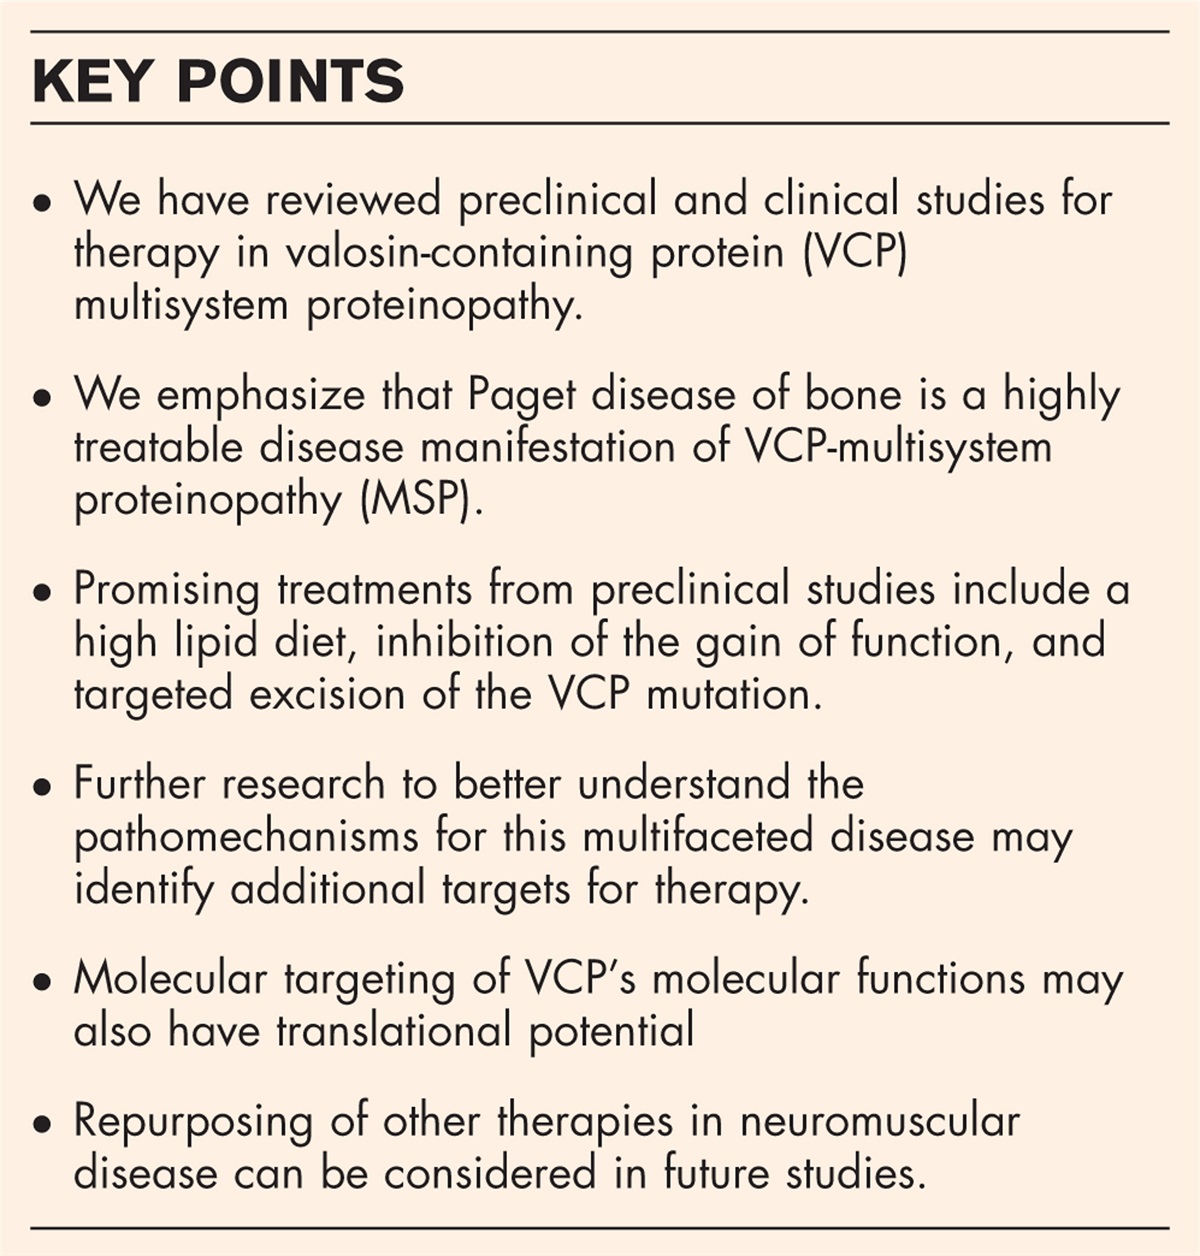 Therapeutic developments for valosin-containing protein mediated multisystem proteinopathy